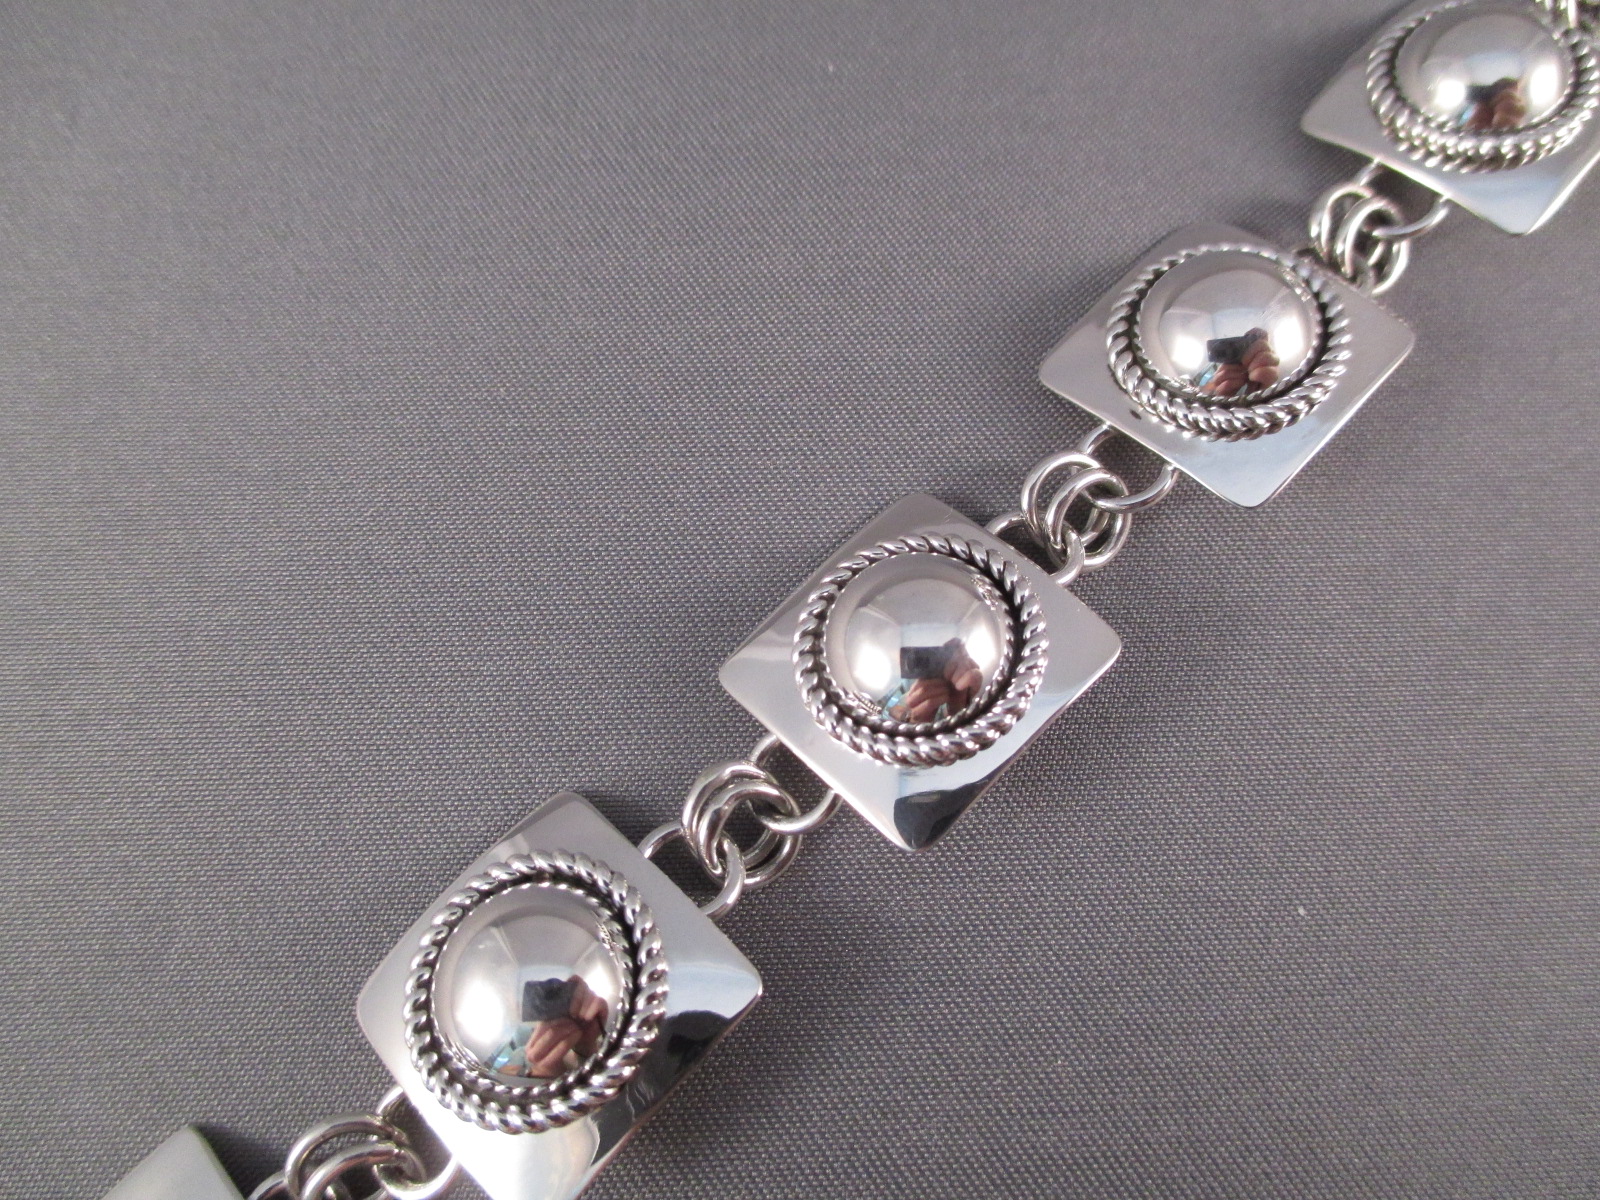 Link Bracelet of Sterling Silver by Native American Navajo Indian jewelry artist, Artie Yellowhorse